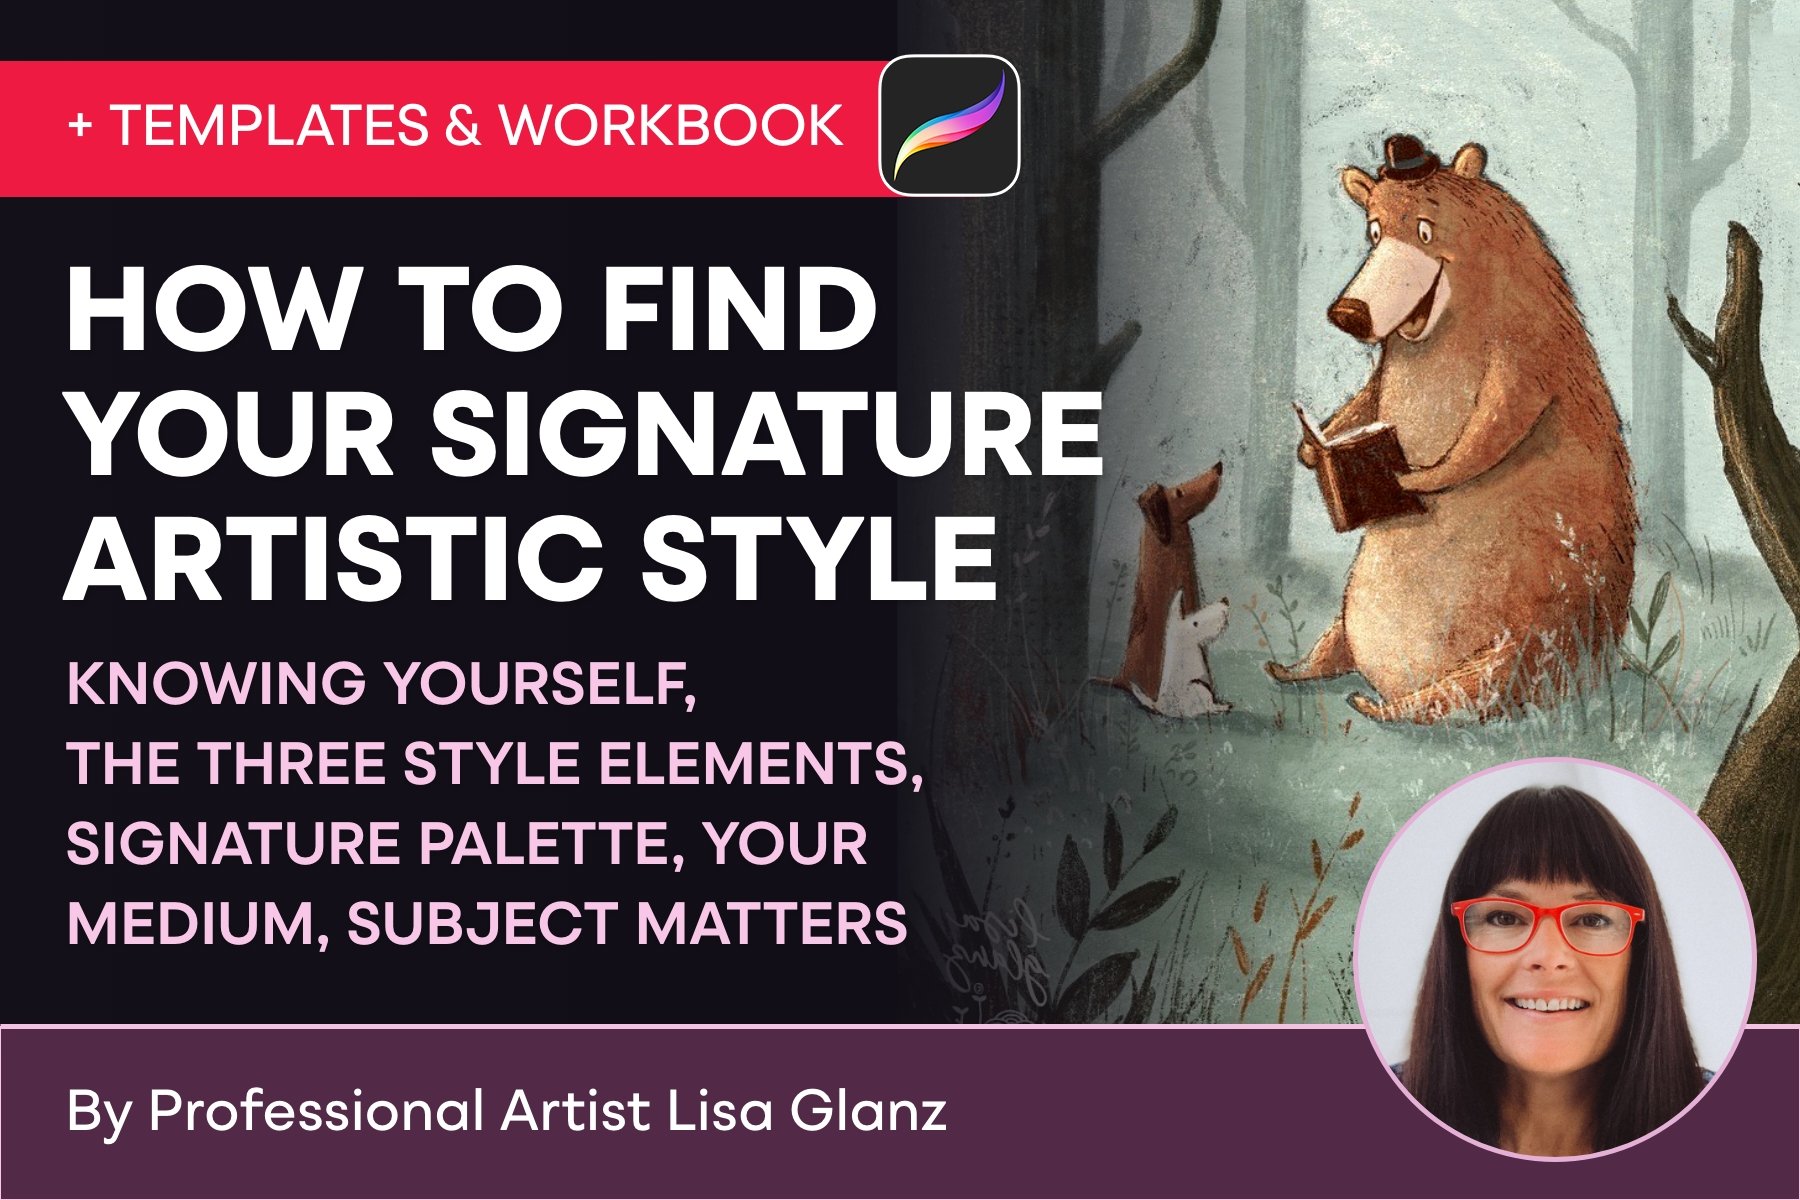 How To Find Your Signature Artistic Style